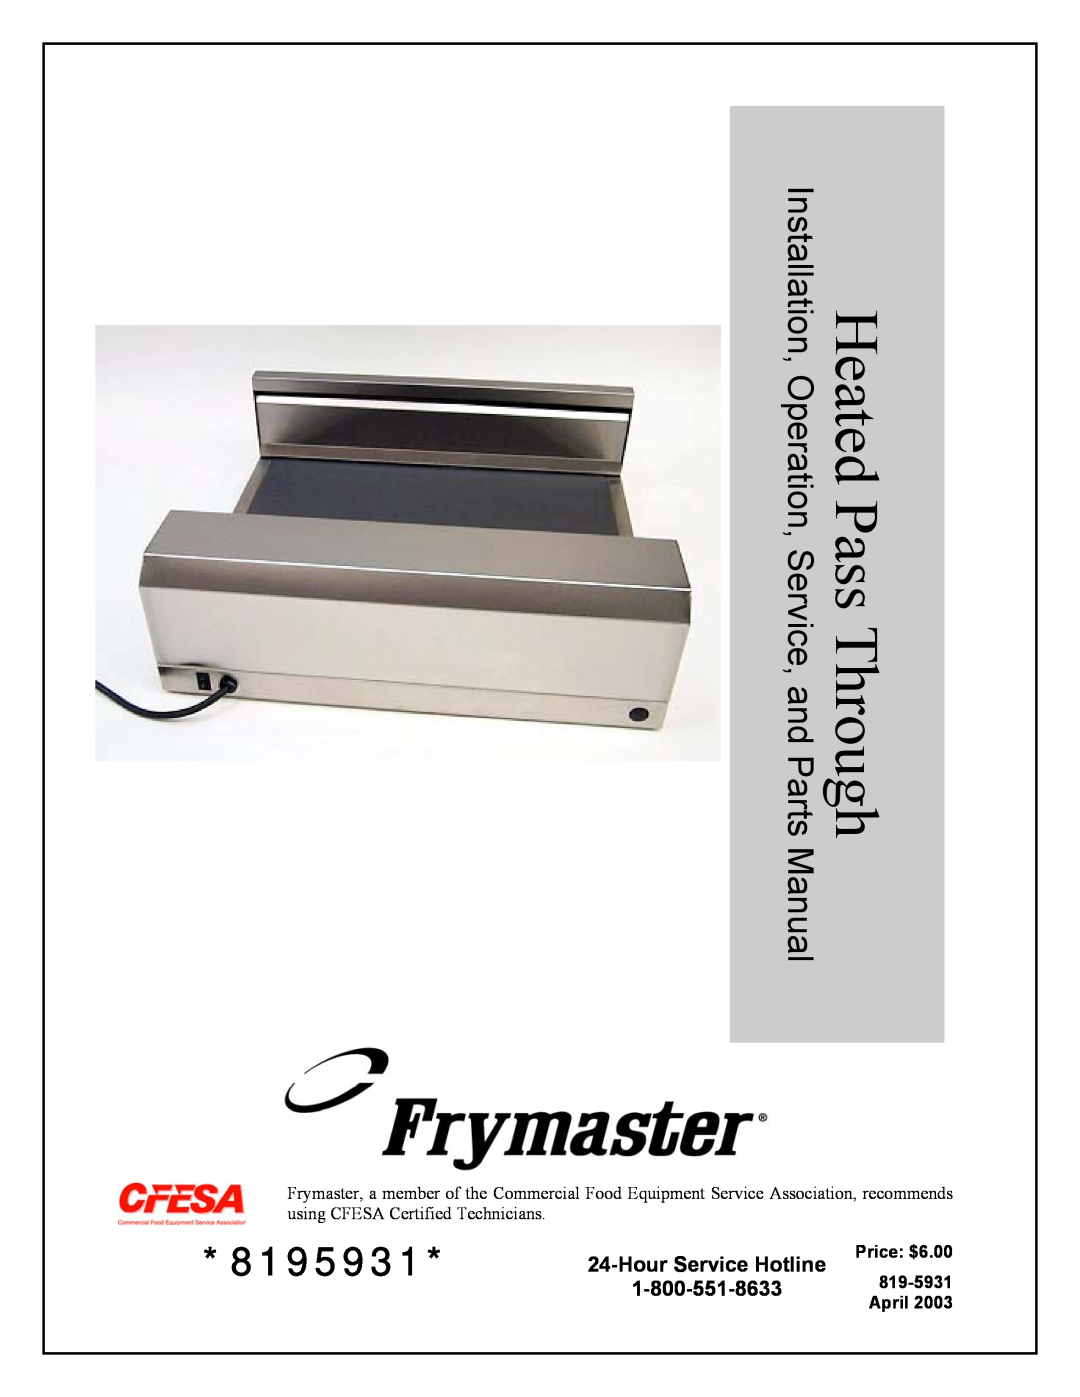 Frymaster none manual Hour Service Hotline, Heated Pass Through, 8195931, Installation, Operation, Service, and Parts 